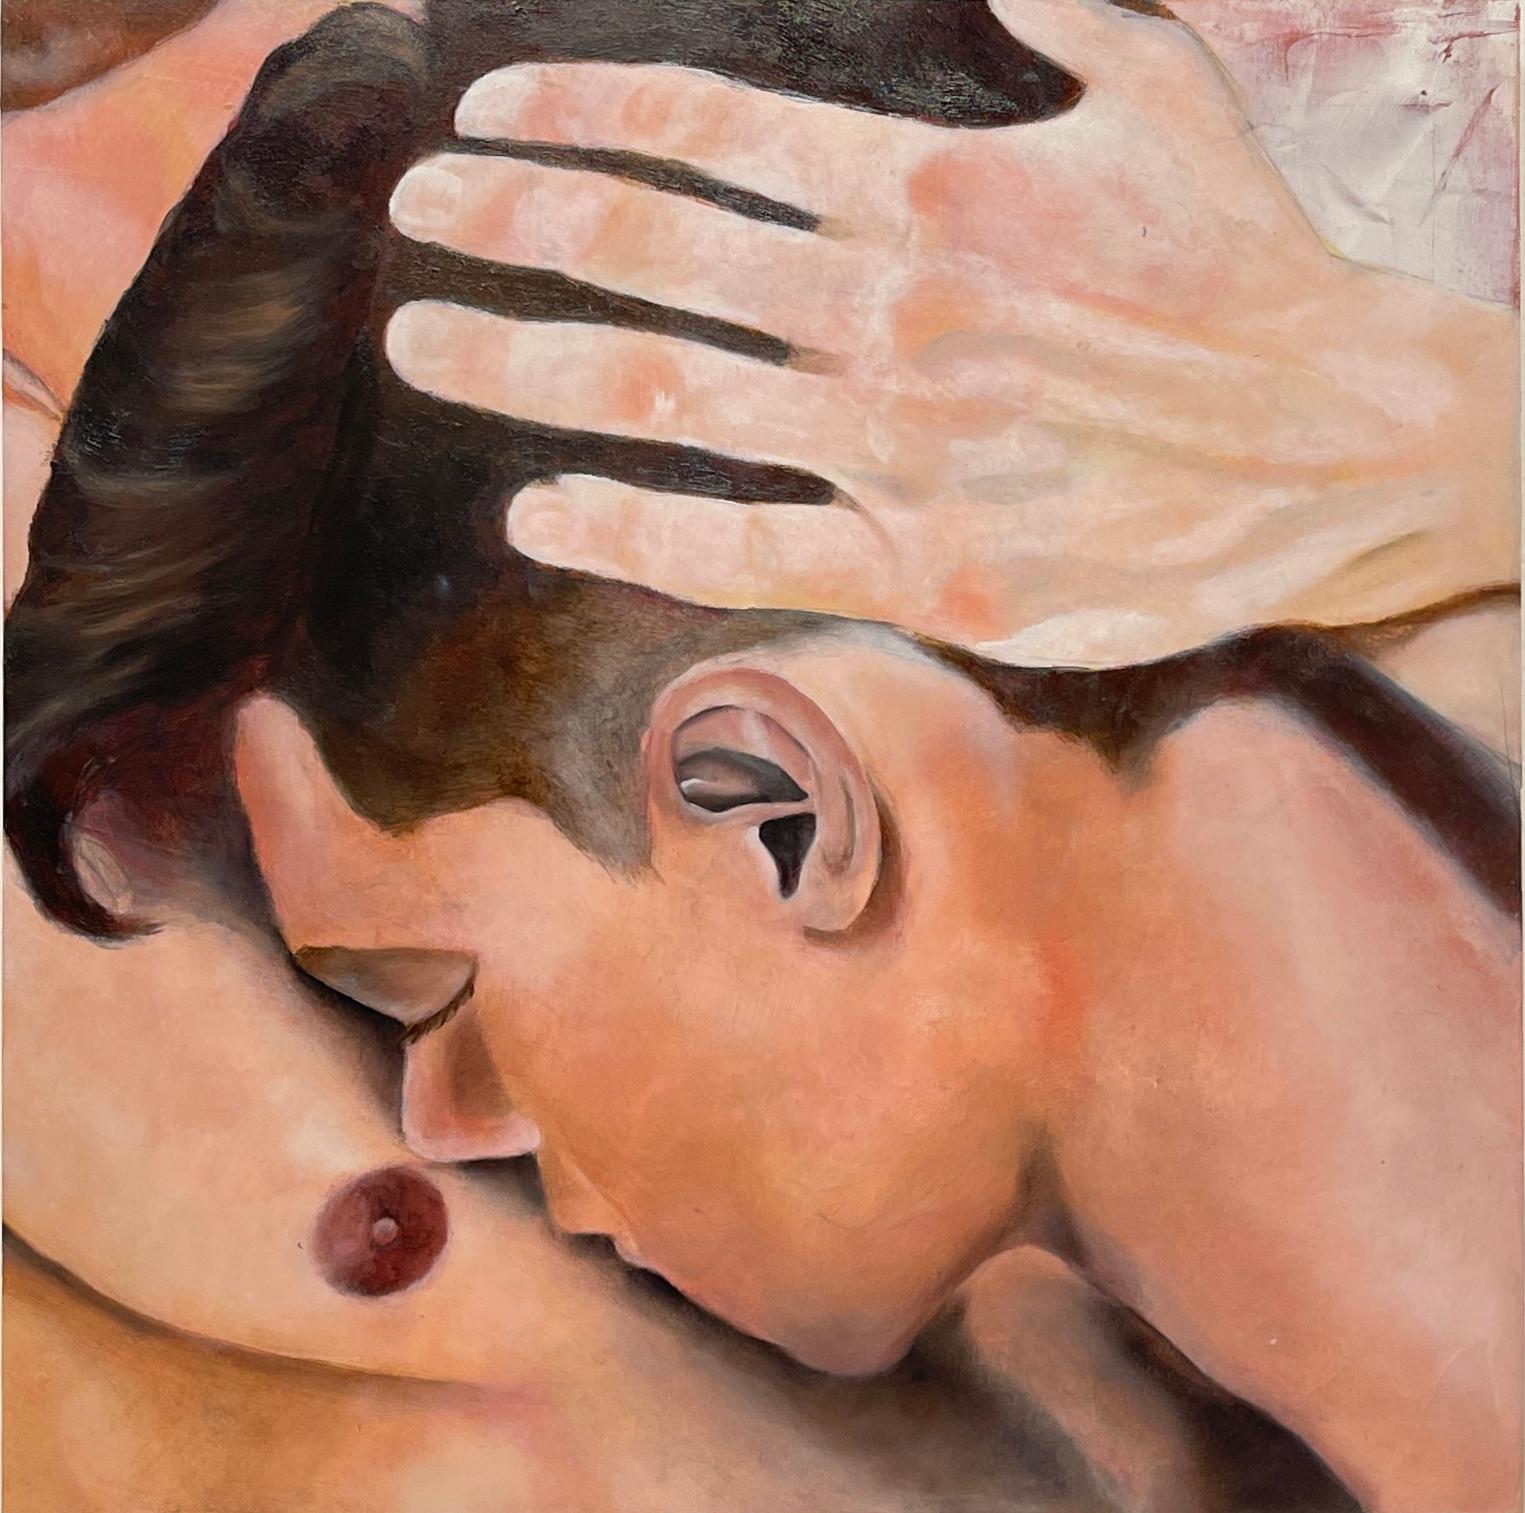 Rick Sindt Nude Painting - I Might Grow to Be Kinder - Intimate Portrayal of a Couple Embracing